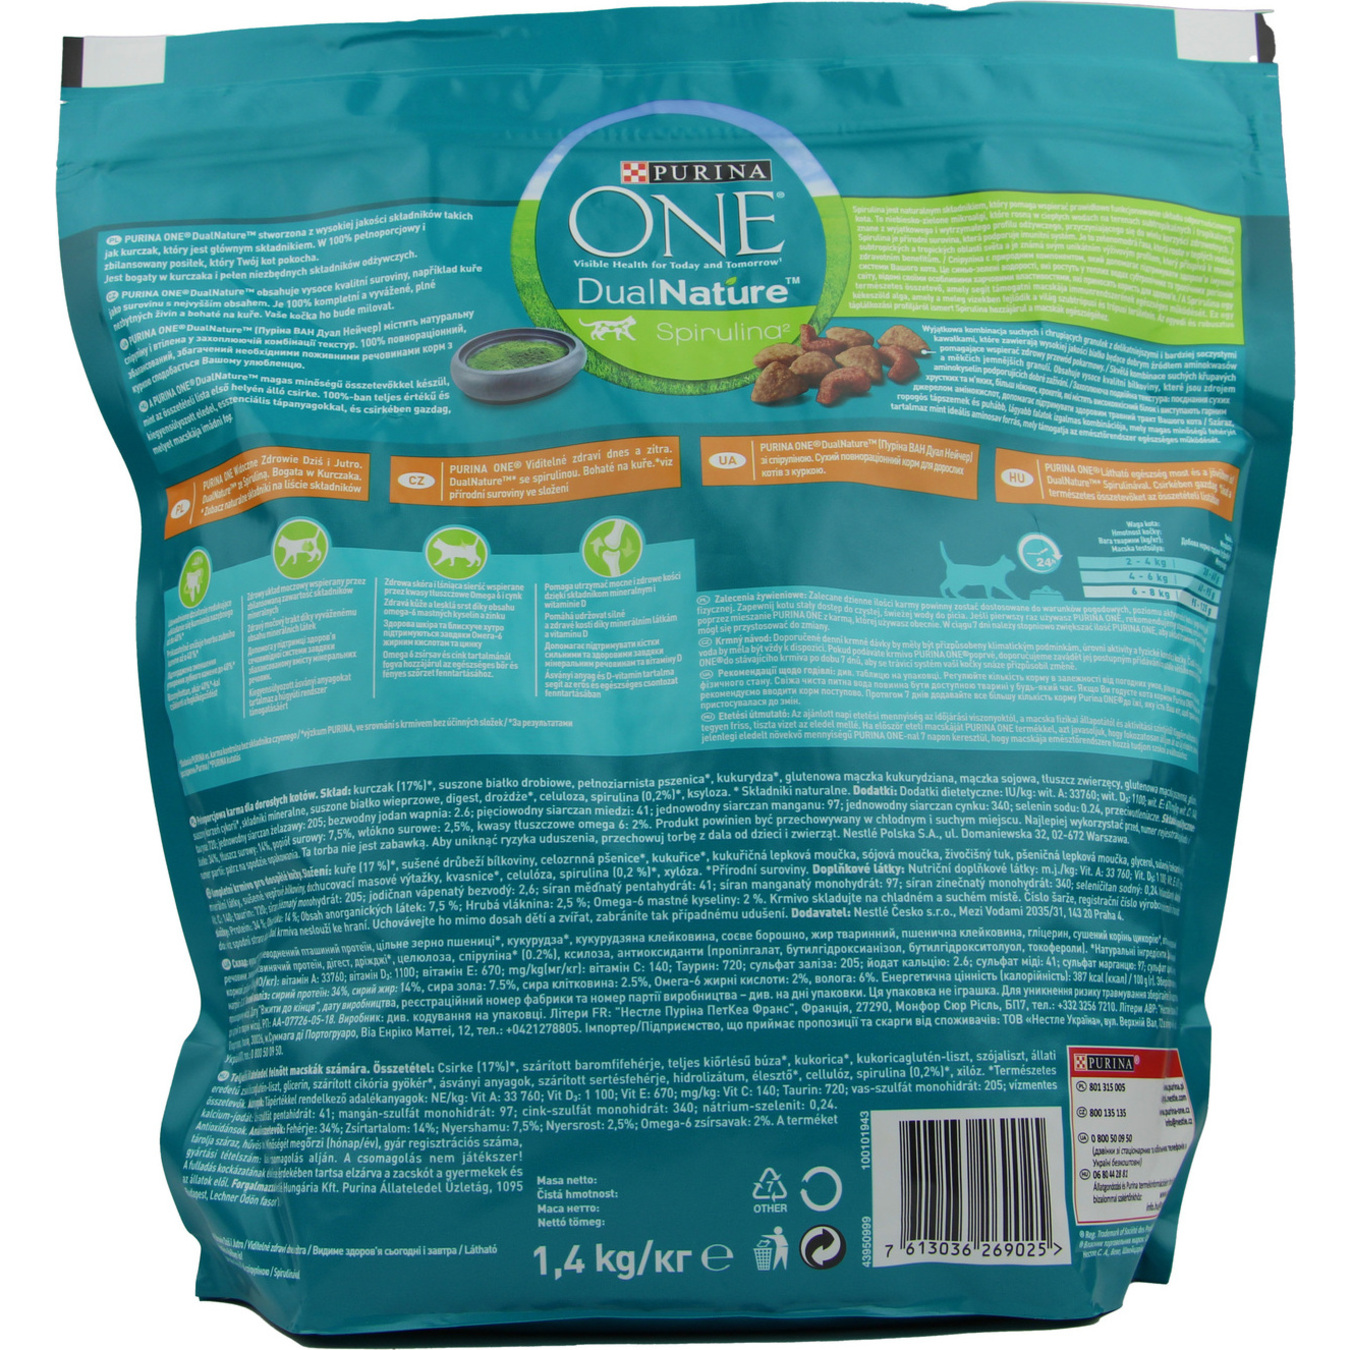 Purina One DualNature Spirulina with chicken for cats food 1,4kg 2